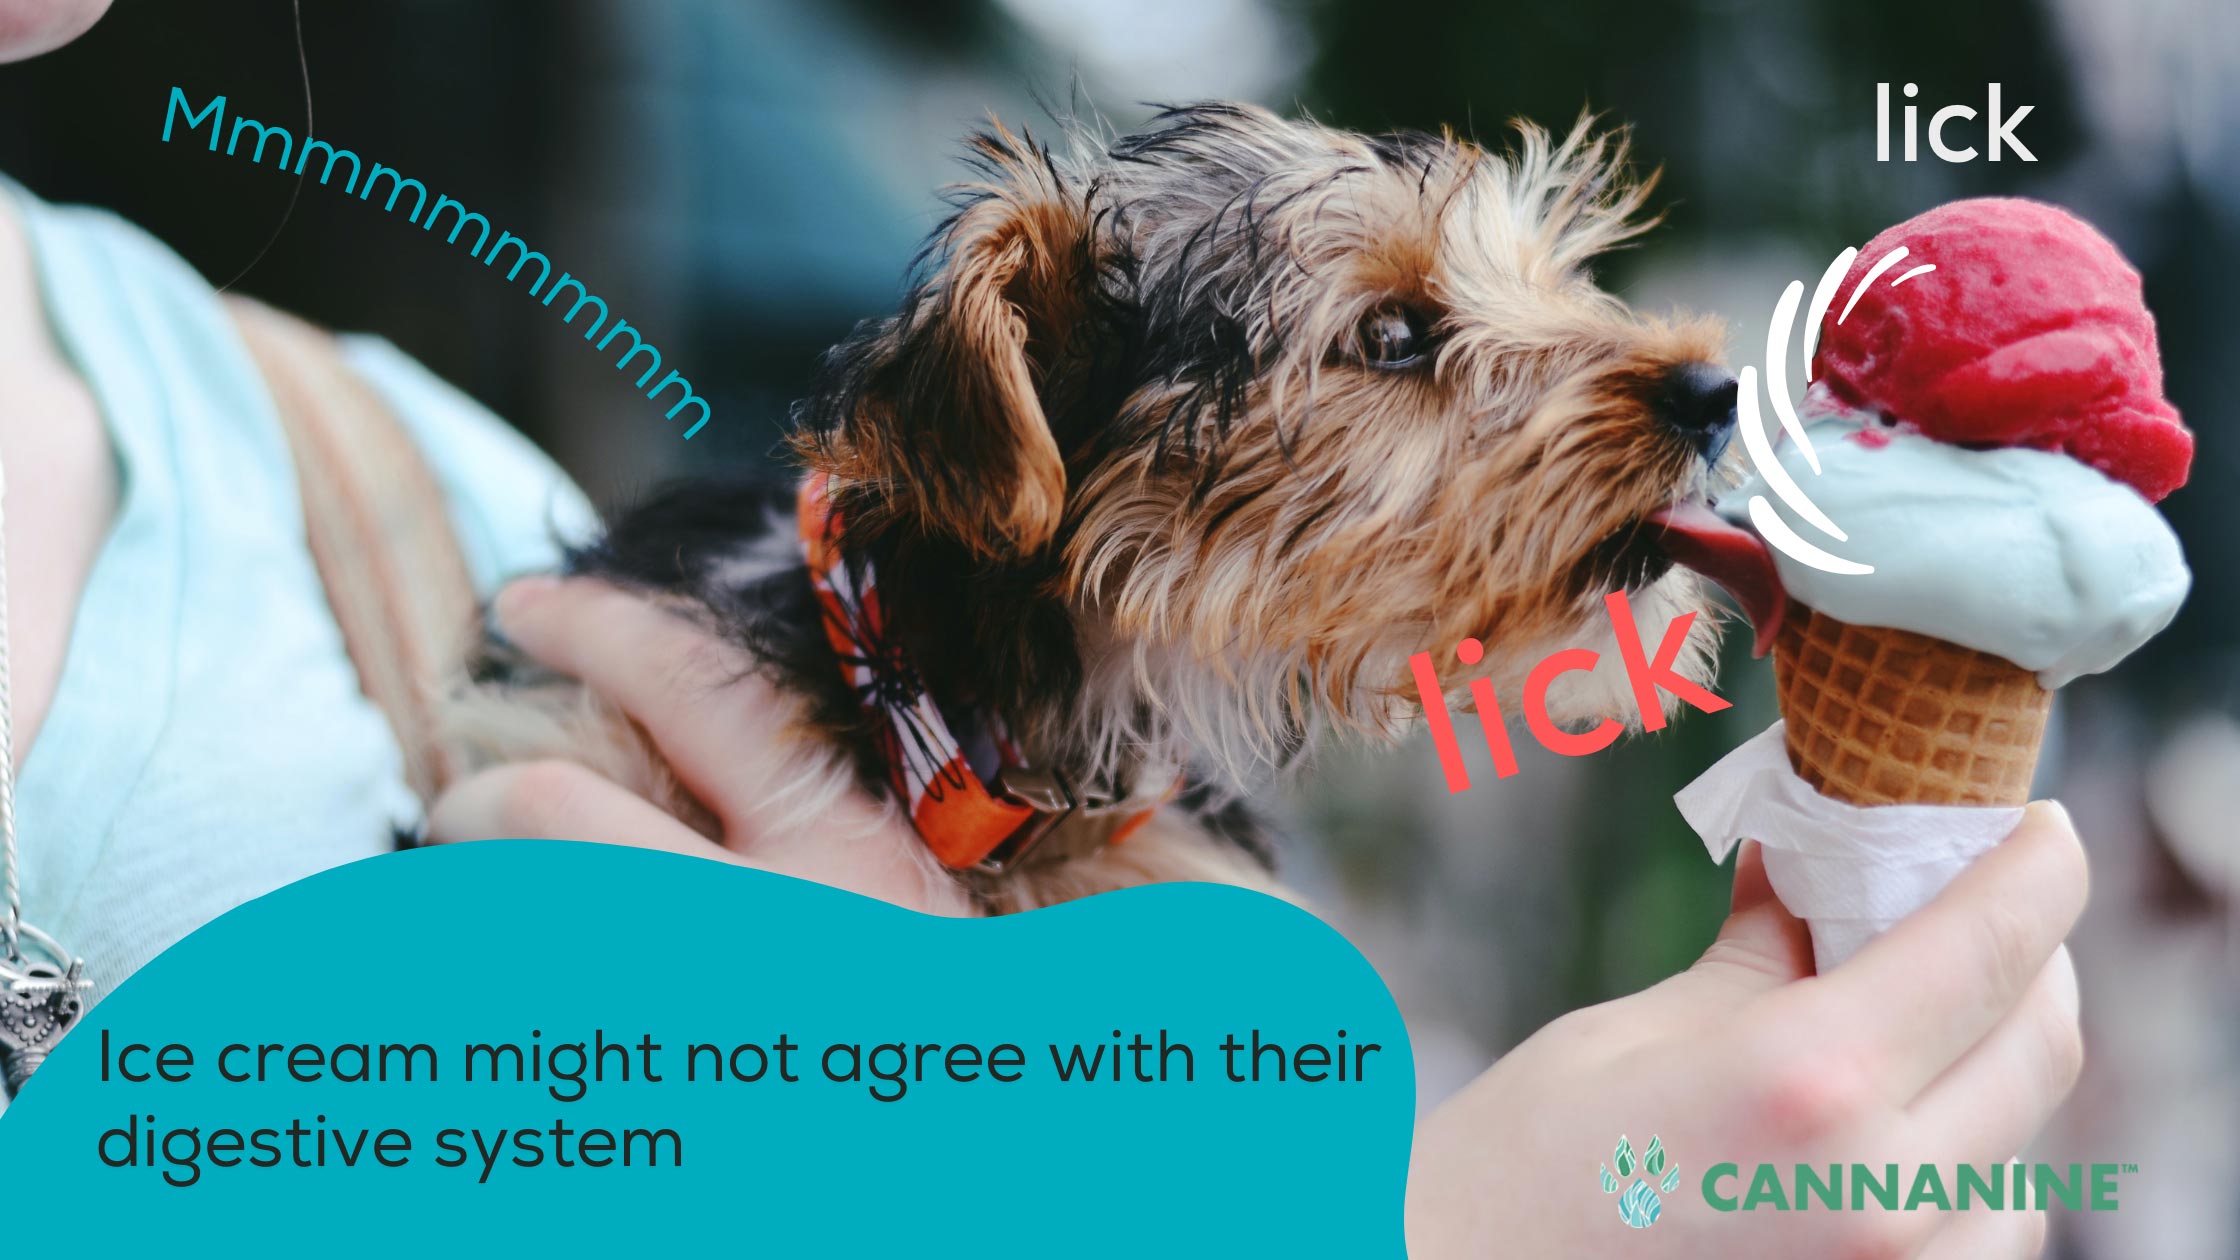 ice cream is not toxic to dogs but it can be tough on a dog’s digestive system